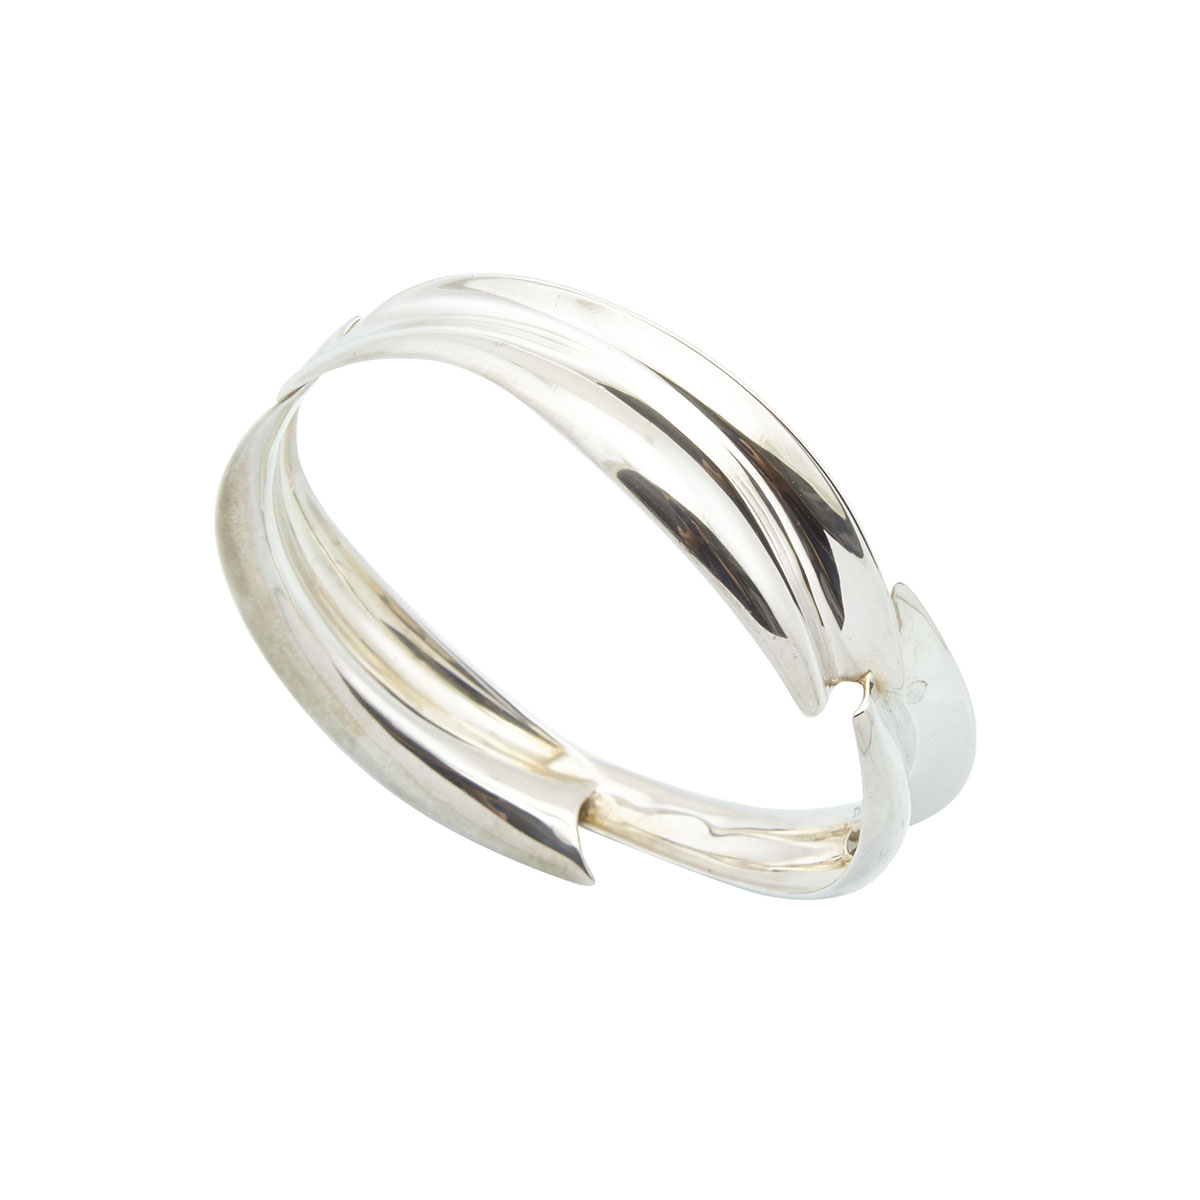 Tiffany & Company Frank Gehry Sterling Silver Fish Bangle